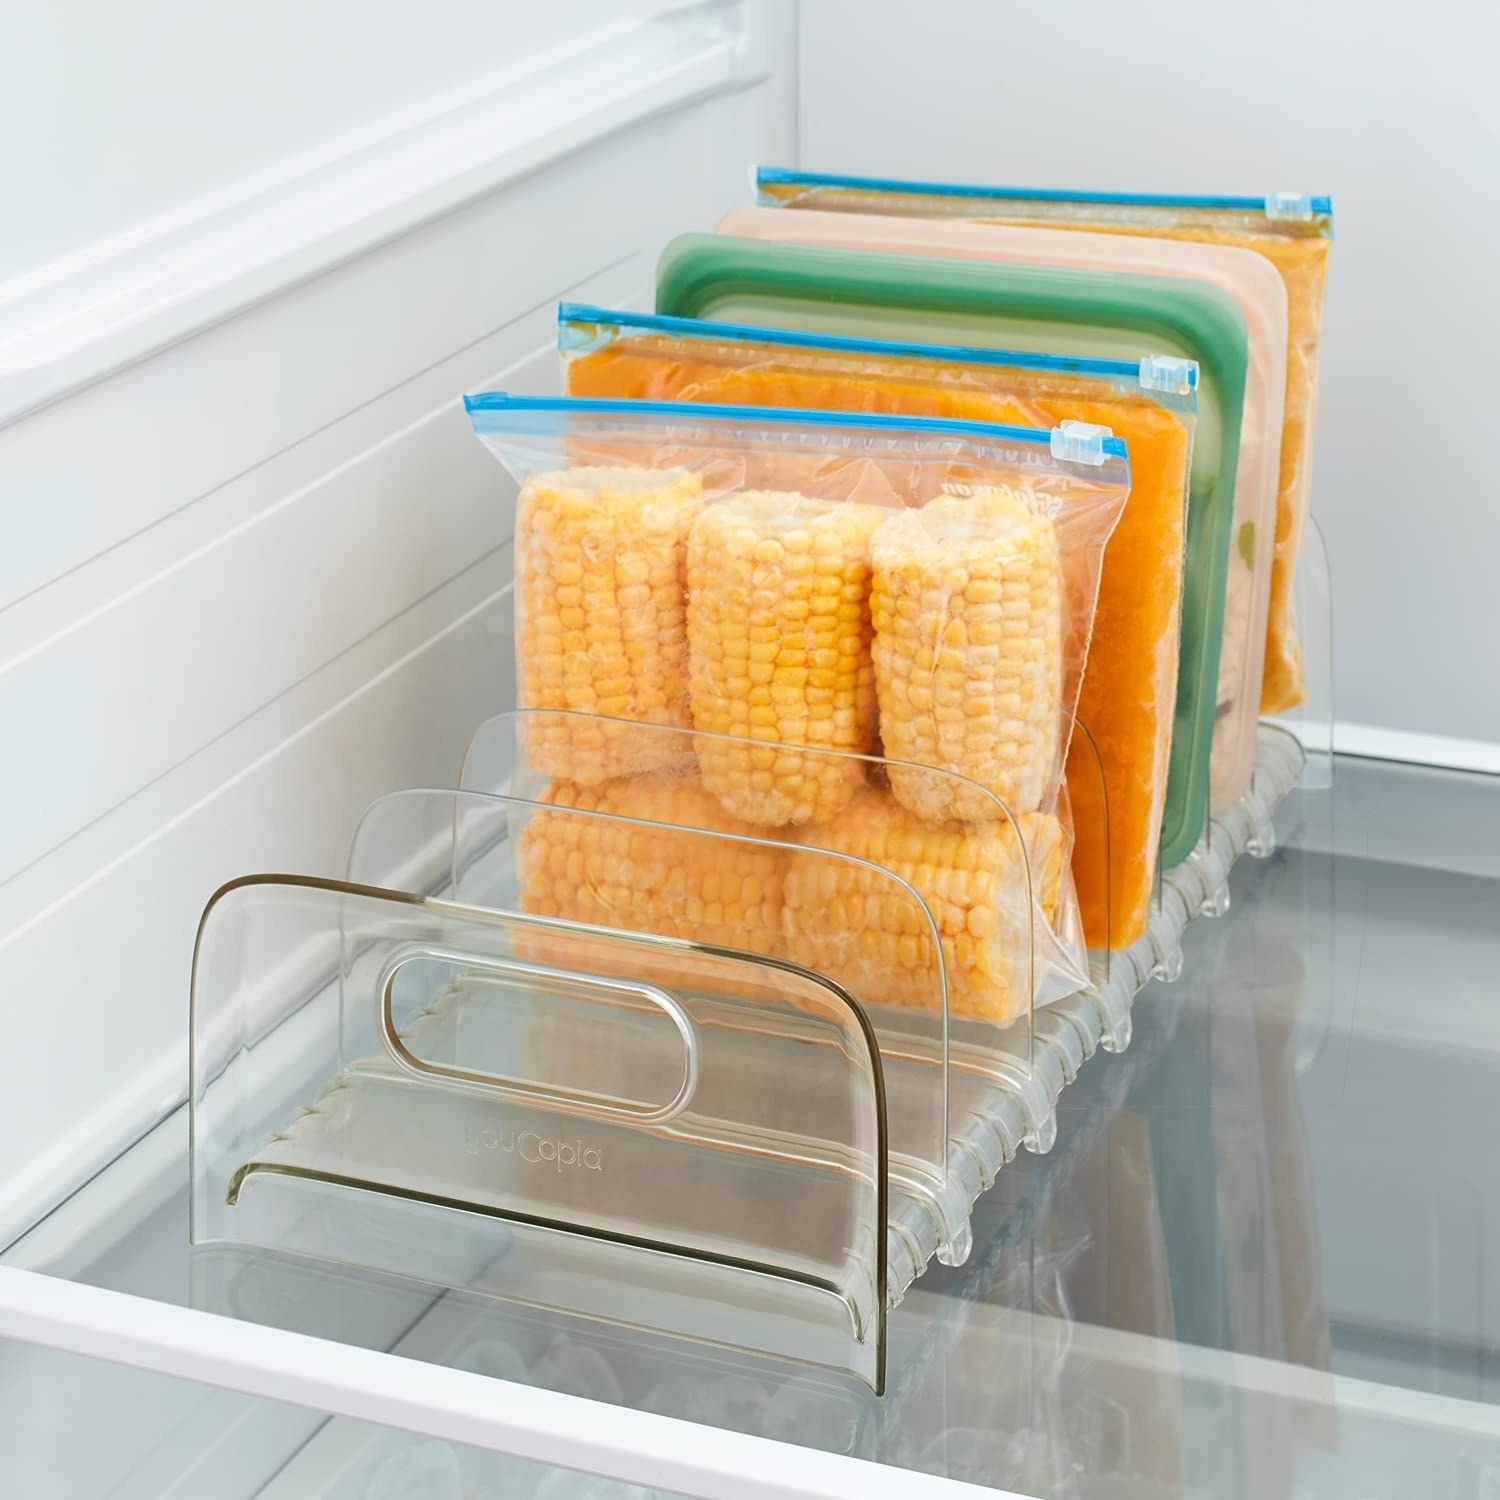 A plastic organizer on a shelf with boxes and bags of food in it